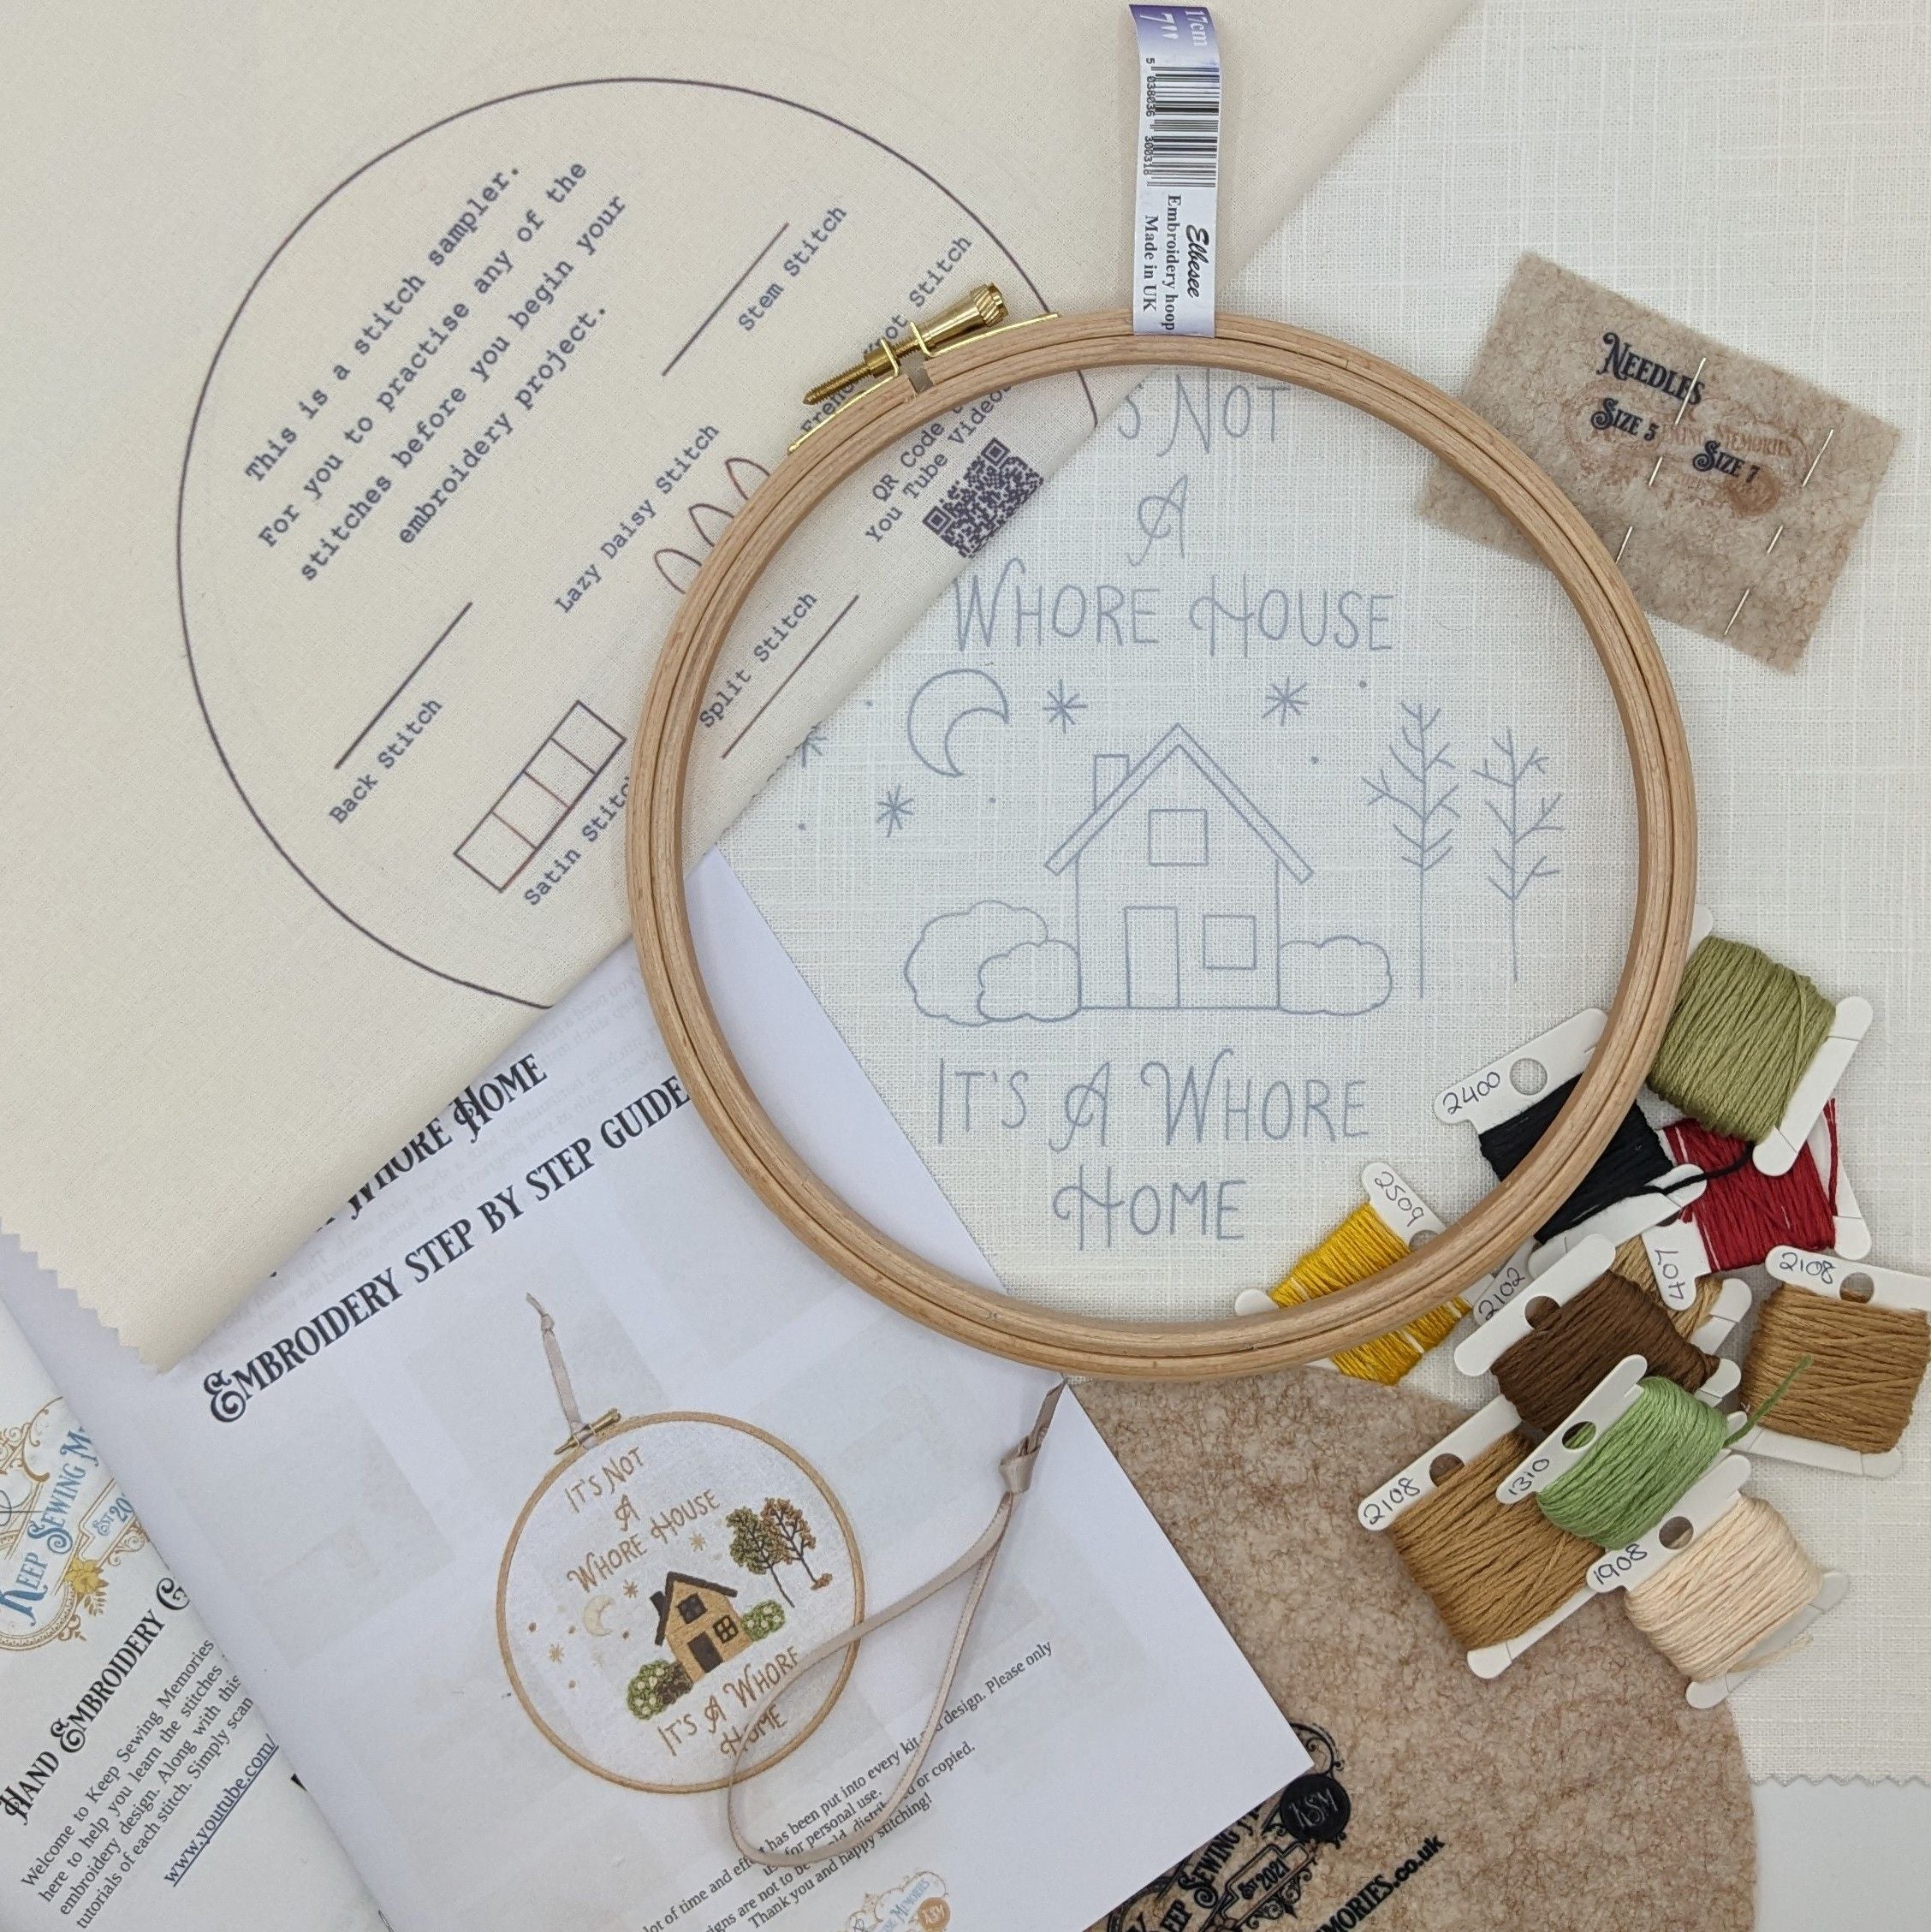 Hand Embroidery Kit- It's not a whore house, It's a whore home'. Sassy, alternative vintage style hand embroidery.